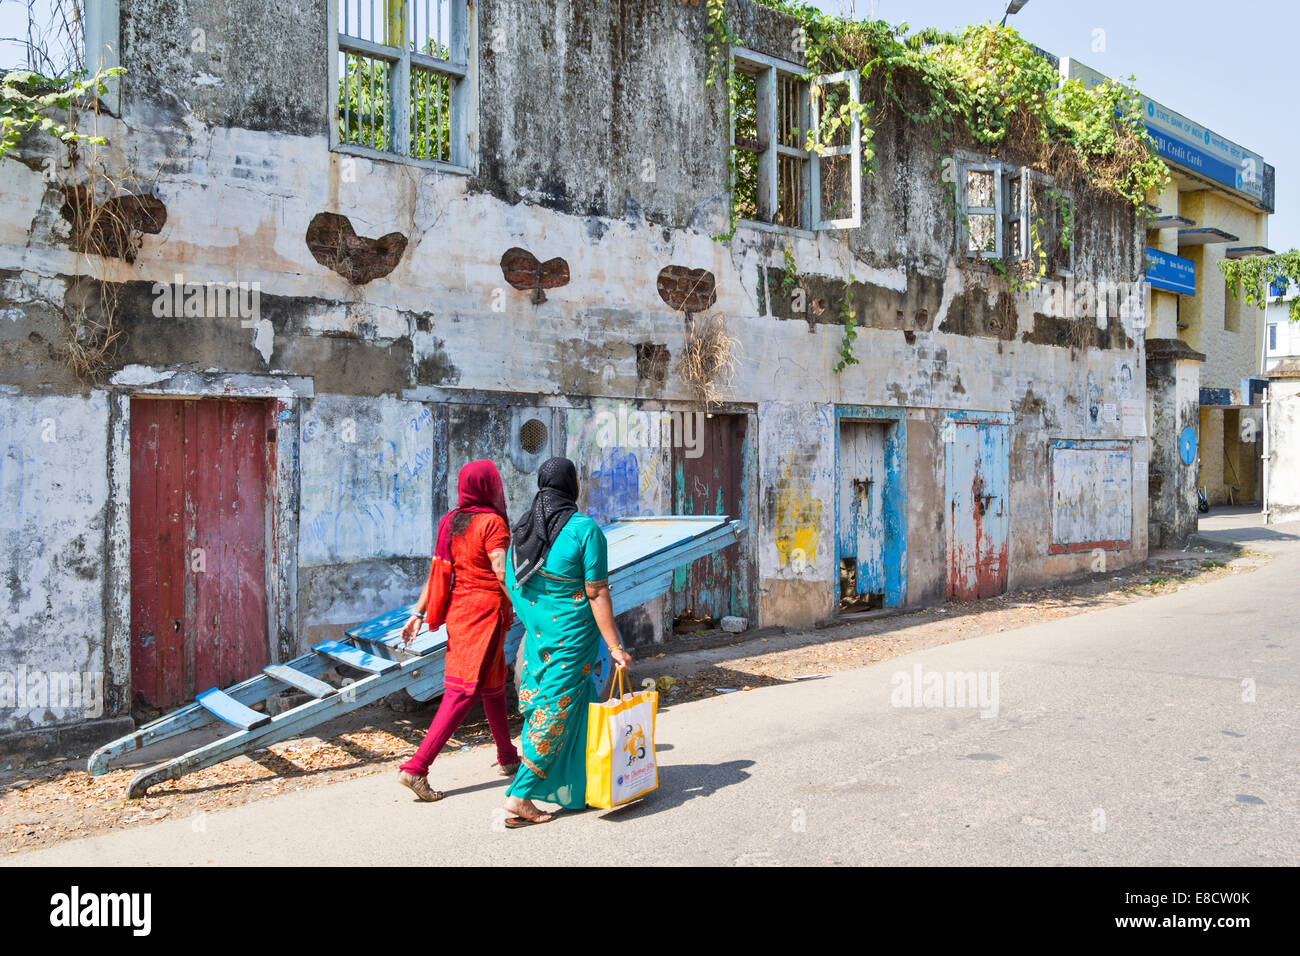 OLD DERELICT BUILDINGS OF PORT KOCHI OR COCHIN INDIA AND PEOPLE IN COLOURFUL DRESS PASSING BY Stock Photo